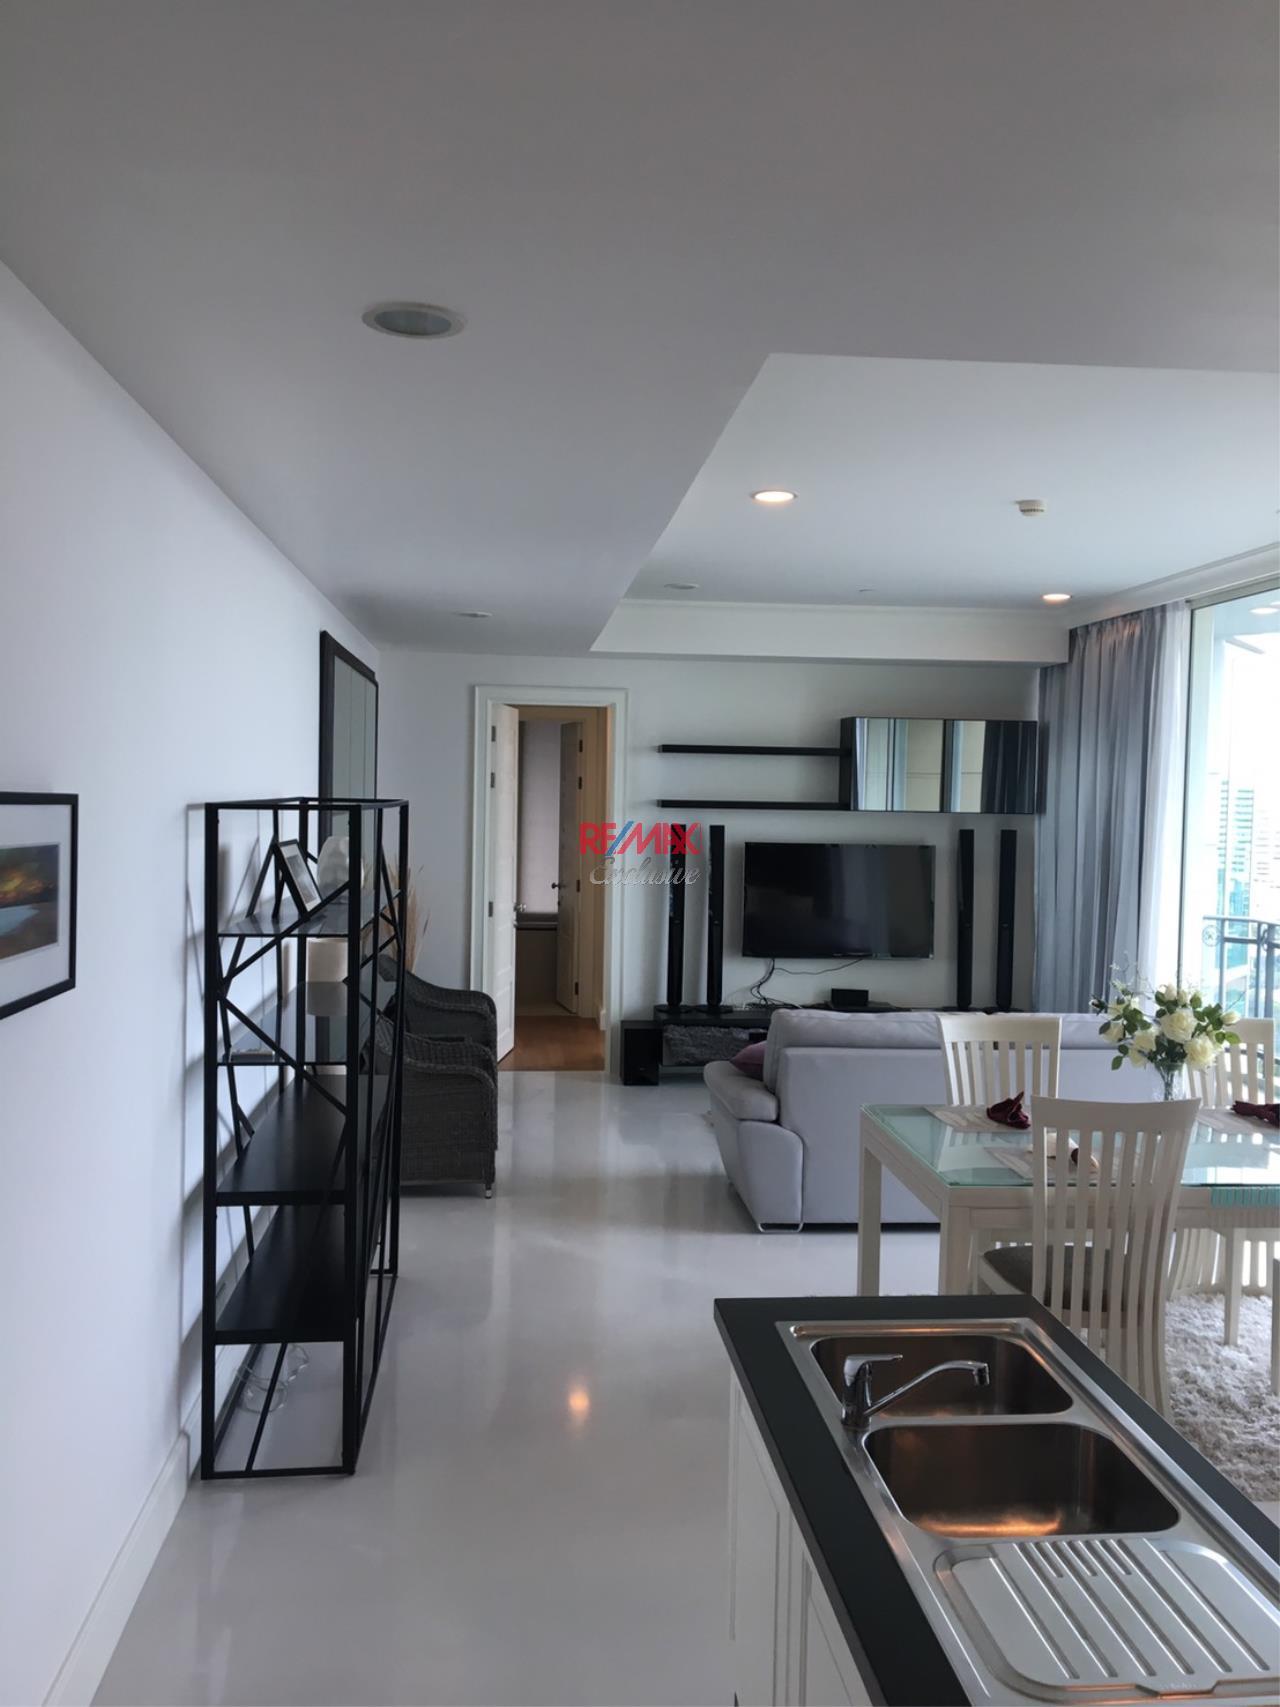 RE/MAX Exclusive Agency's ROYCE RESIDENCE, 2 BEDROOM, 112 SQM - FOR RENT 80,000 THB 3